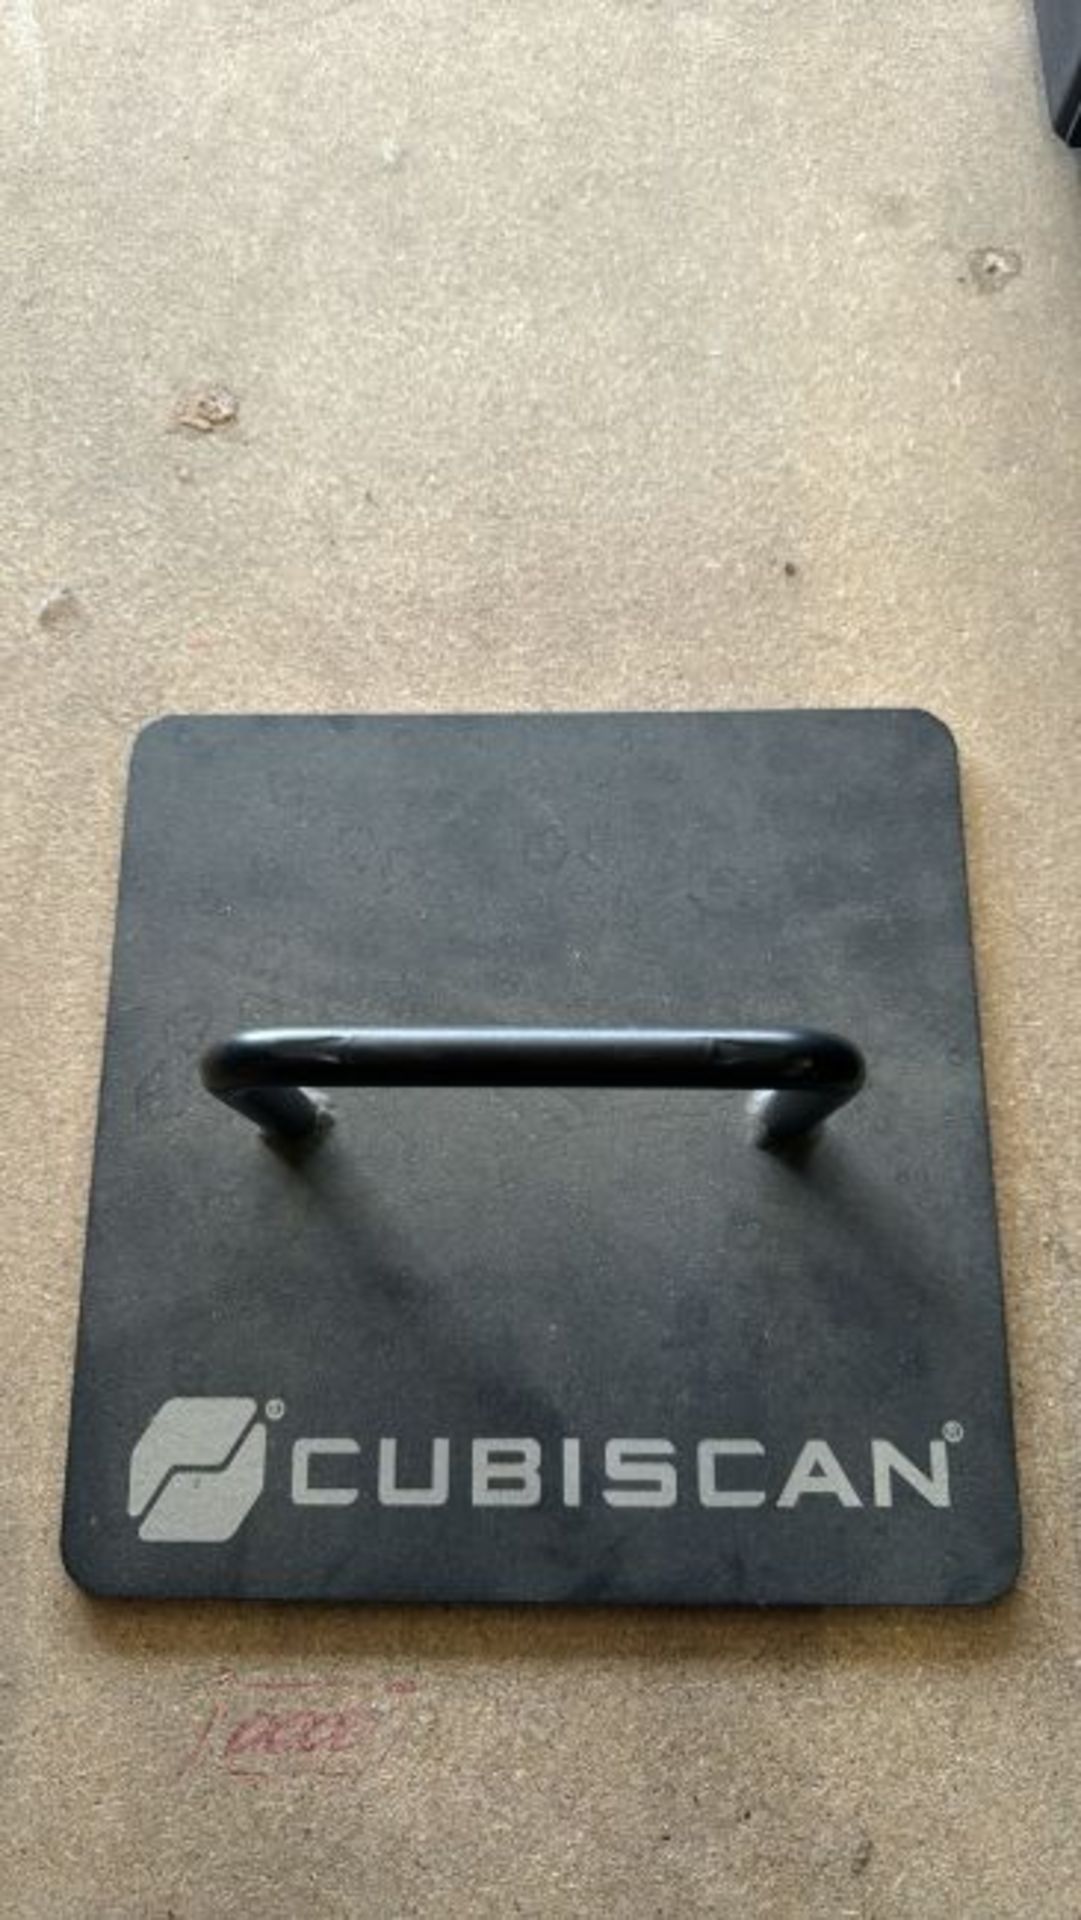 Cubiscan 325 - Excels at dimensioning apparel and non-rigid items - Image 13 of 13